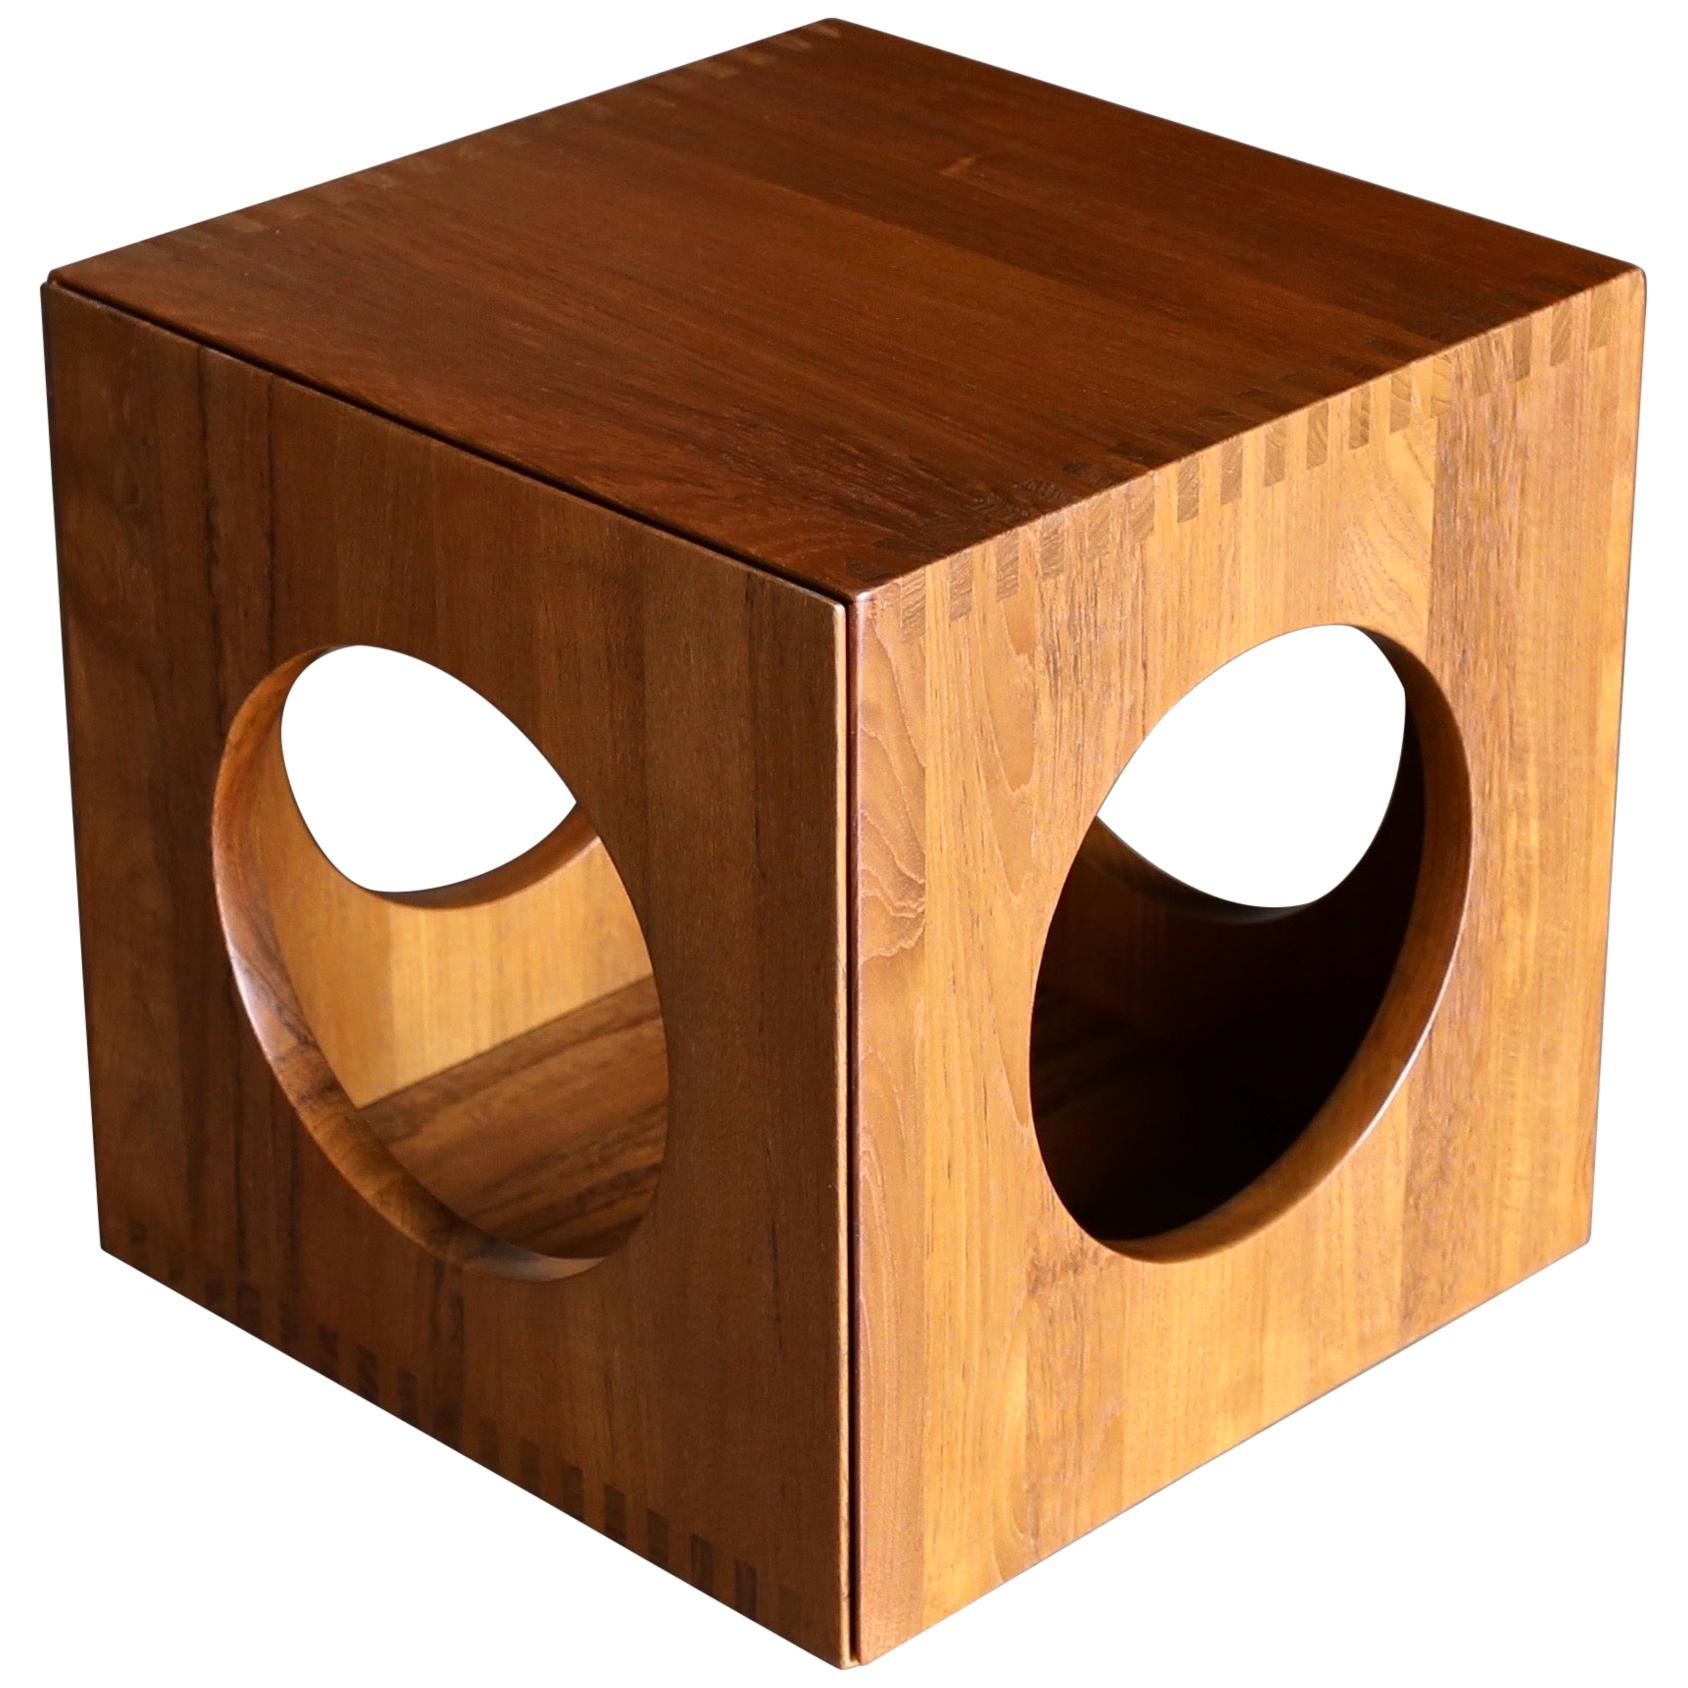 Jens Quistgaard Cube Occasional Tables for Richard Nissen, circa 1982